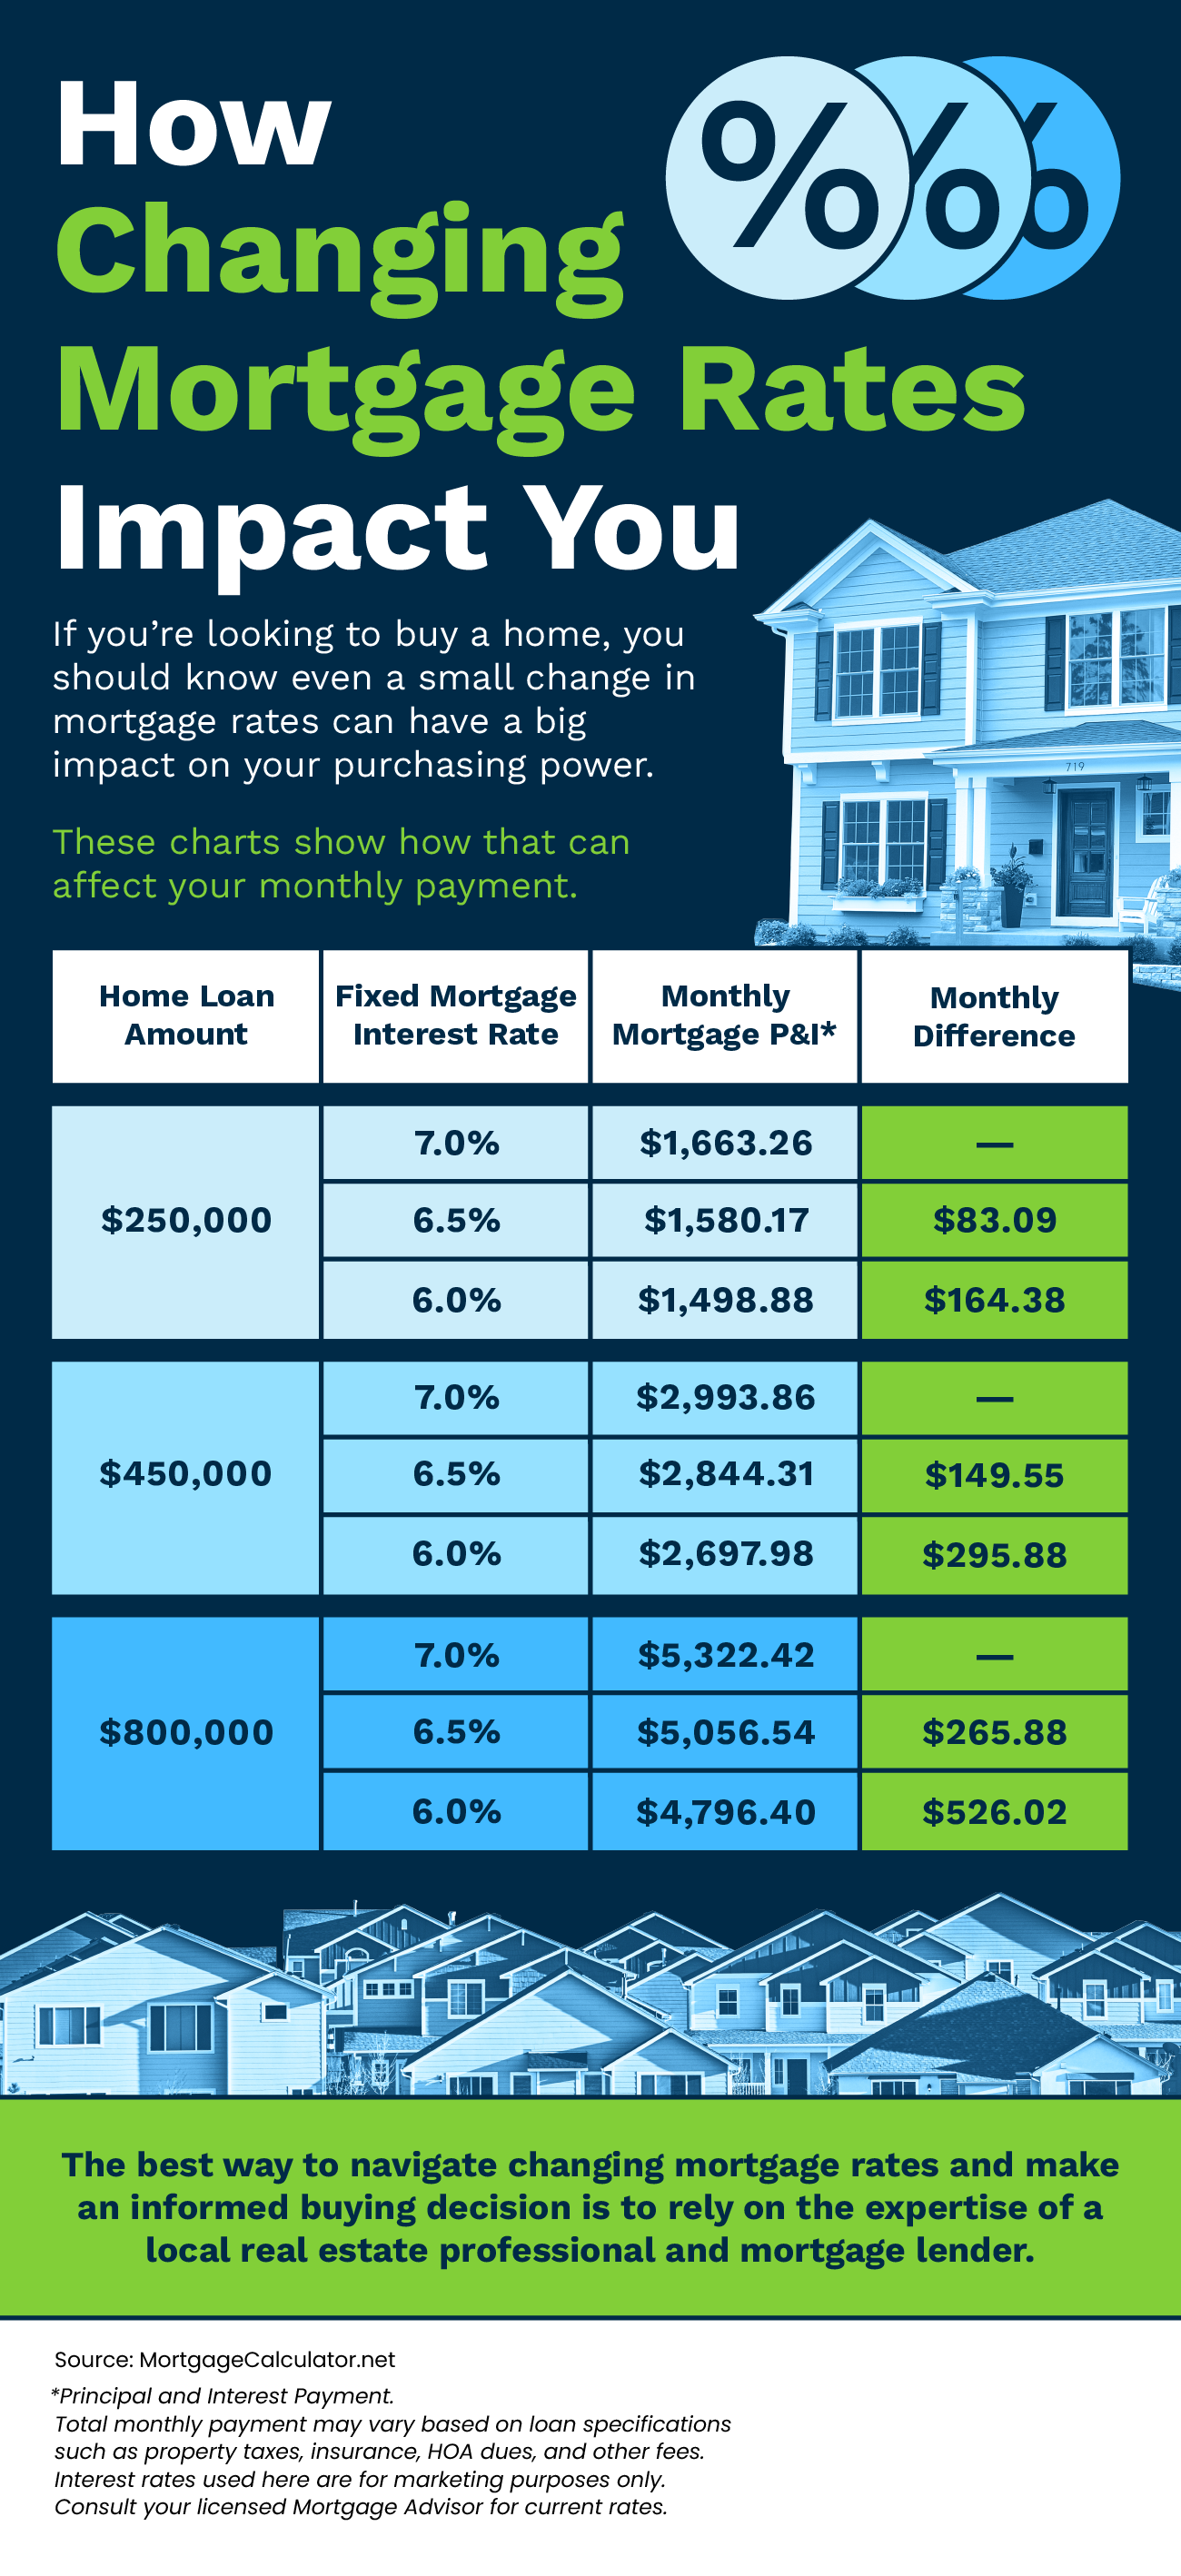 How Changing Mortgage Rates Impact You [INFOGRAPHIC]